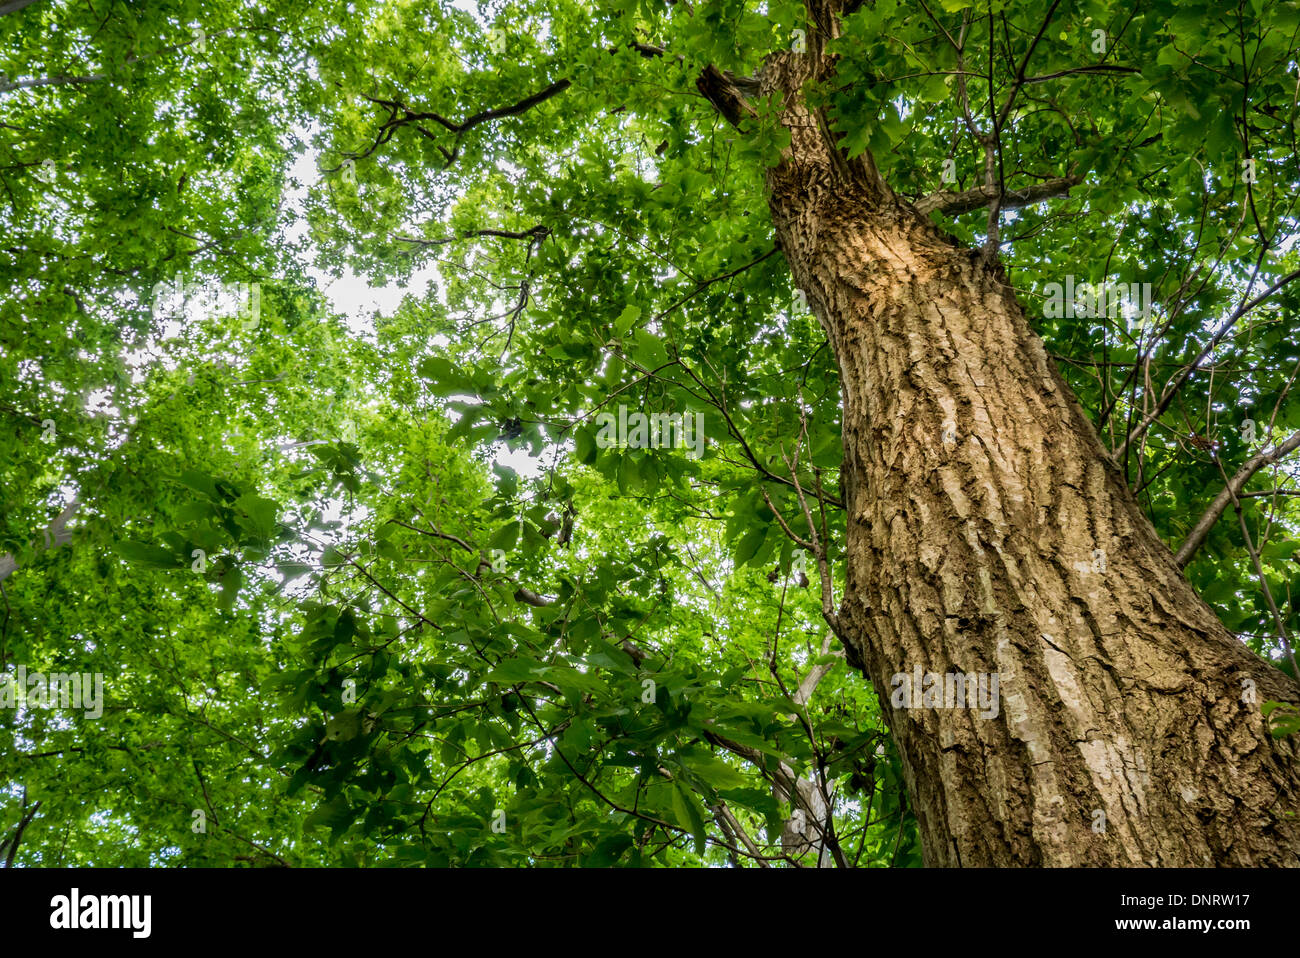 View of Looking up through a Tree, Chiba, Japan Stock Photo